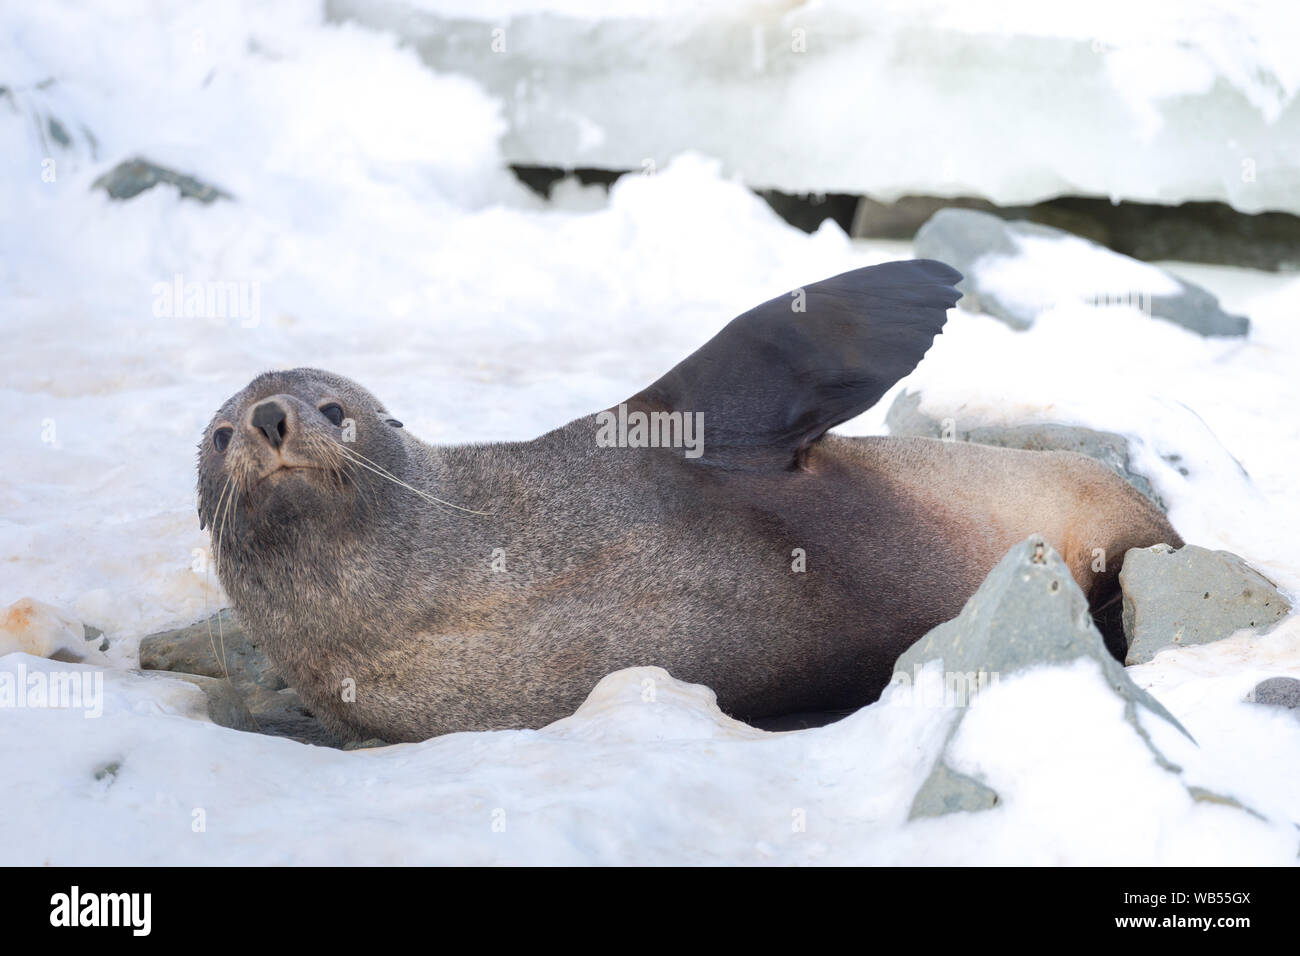 The Antarctic fur seal, sometimes called the Kerguelen fur seal, also known as Arctocephalus gazella sitting on the ice in Antarctic. Stock Photo